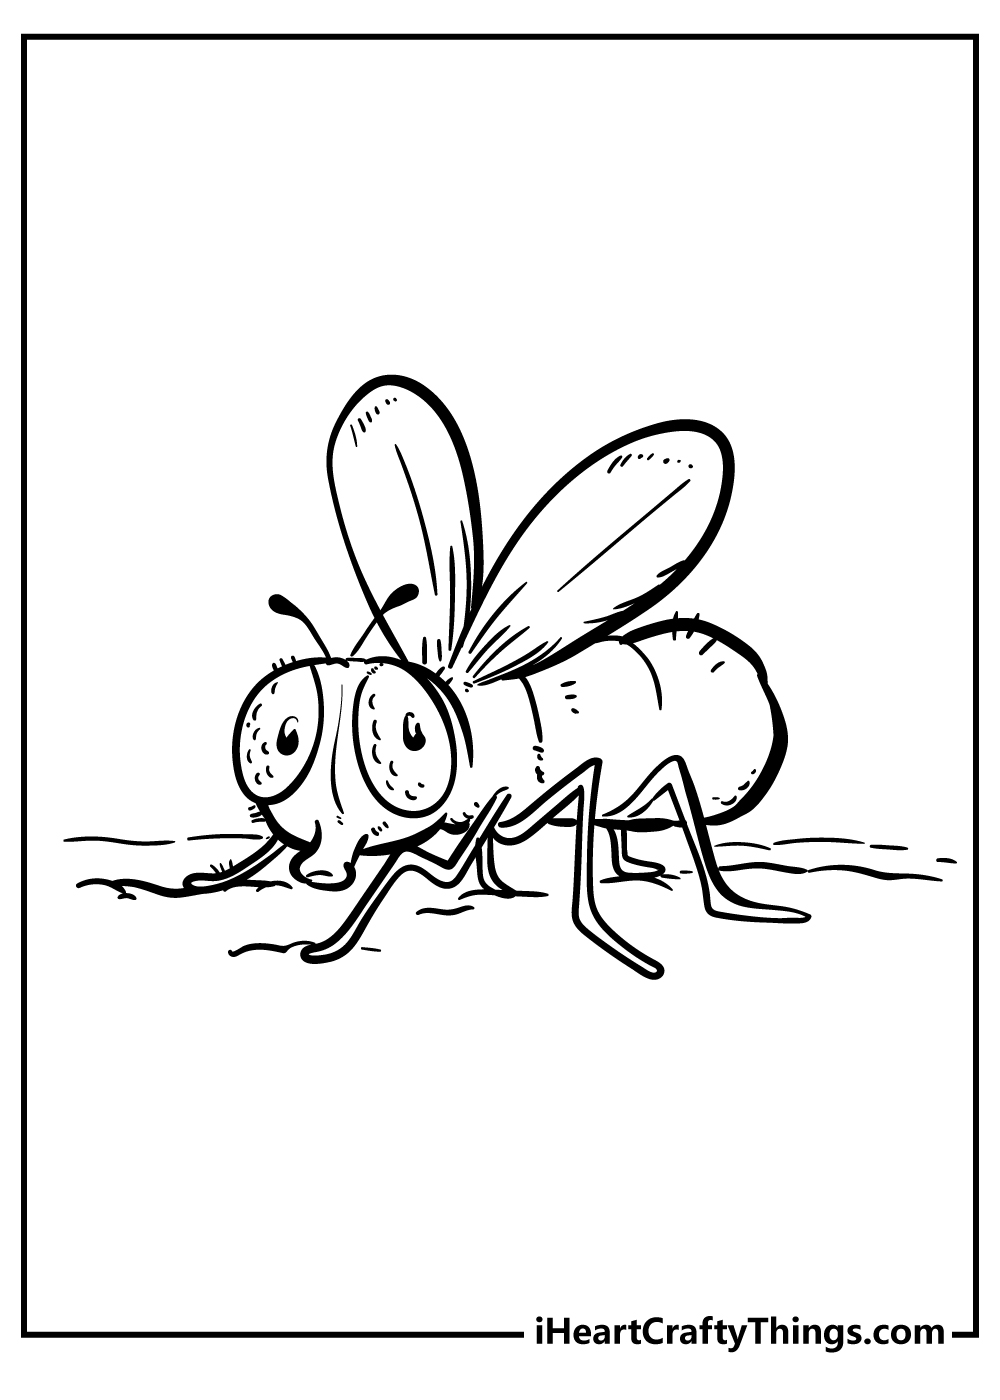 Insect Coloring Pages free pdf download